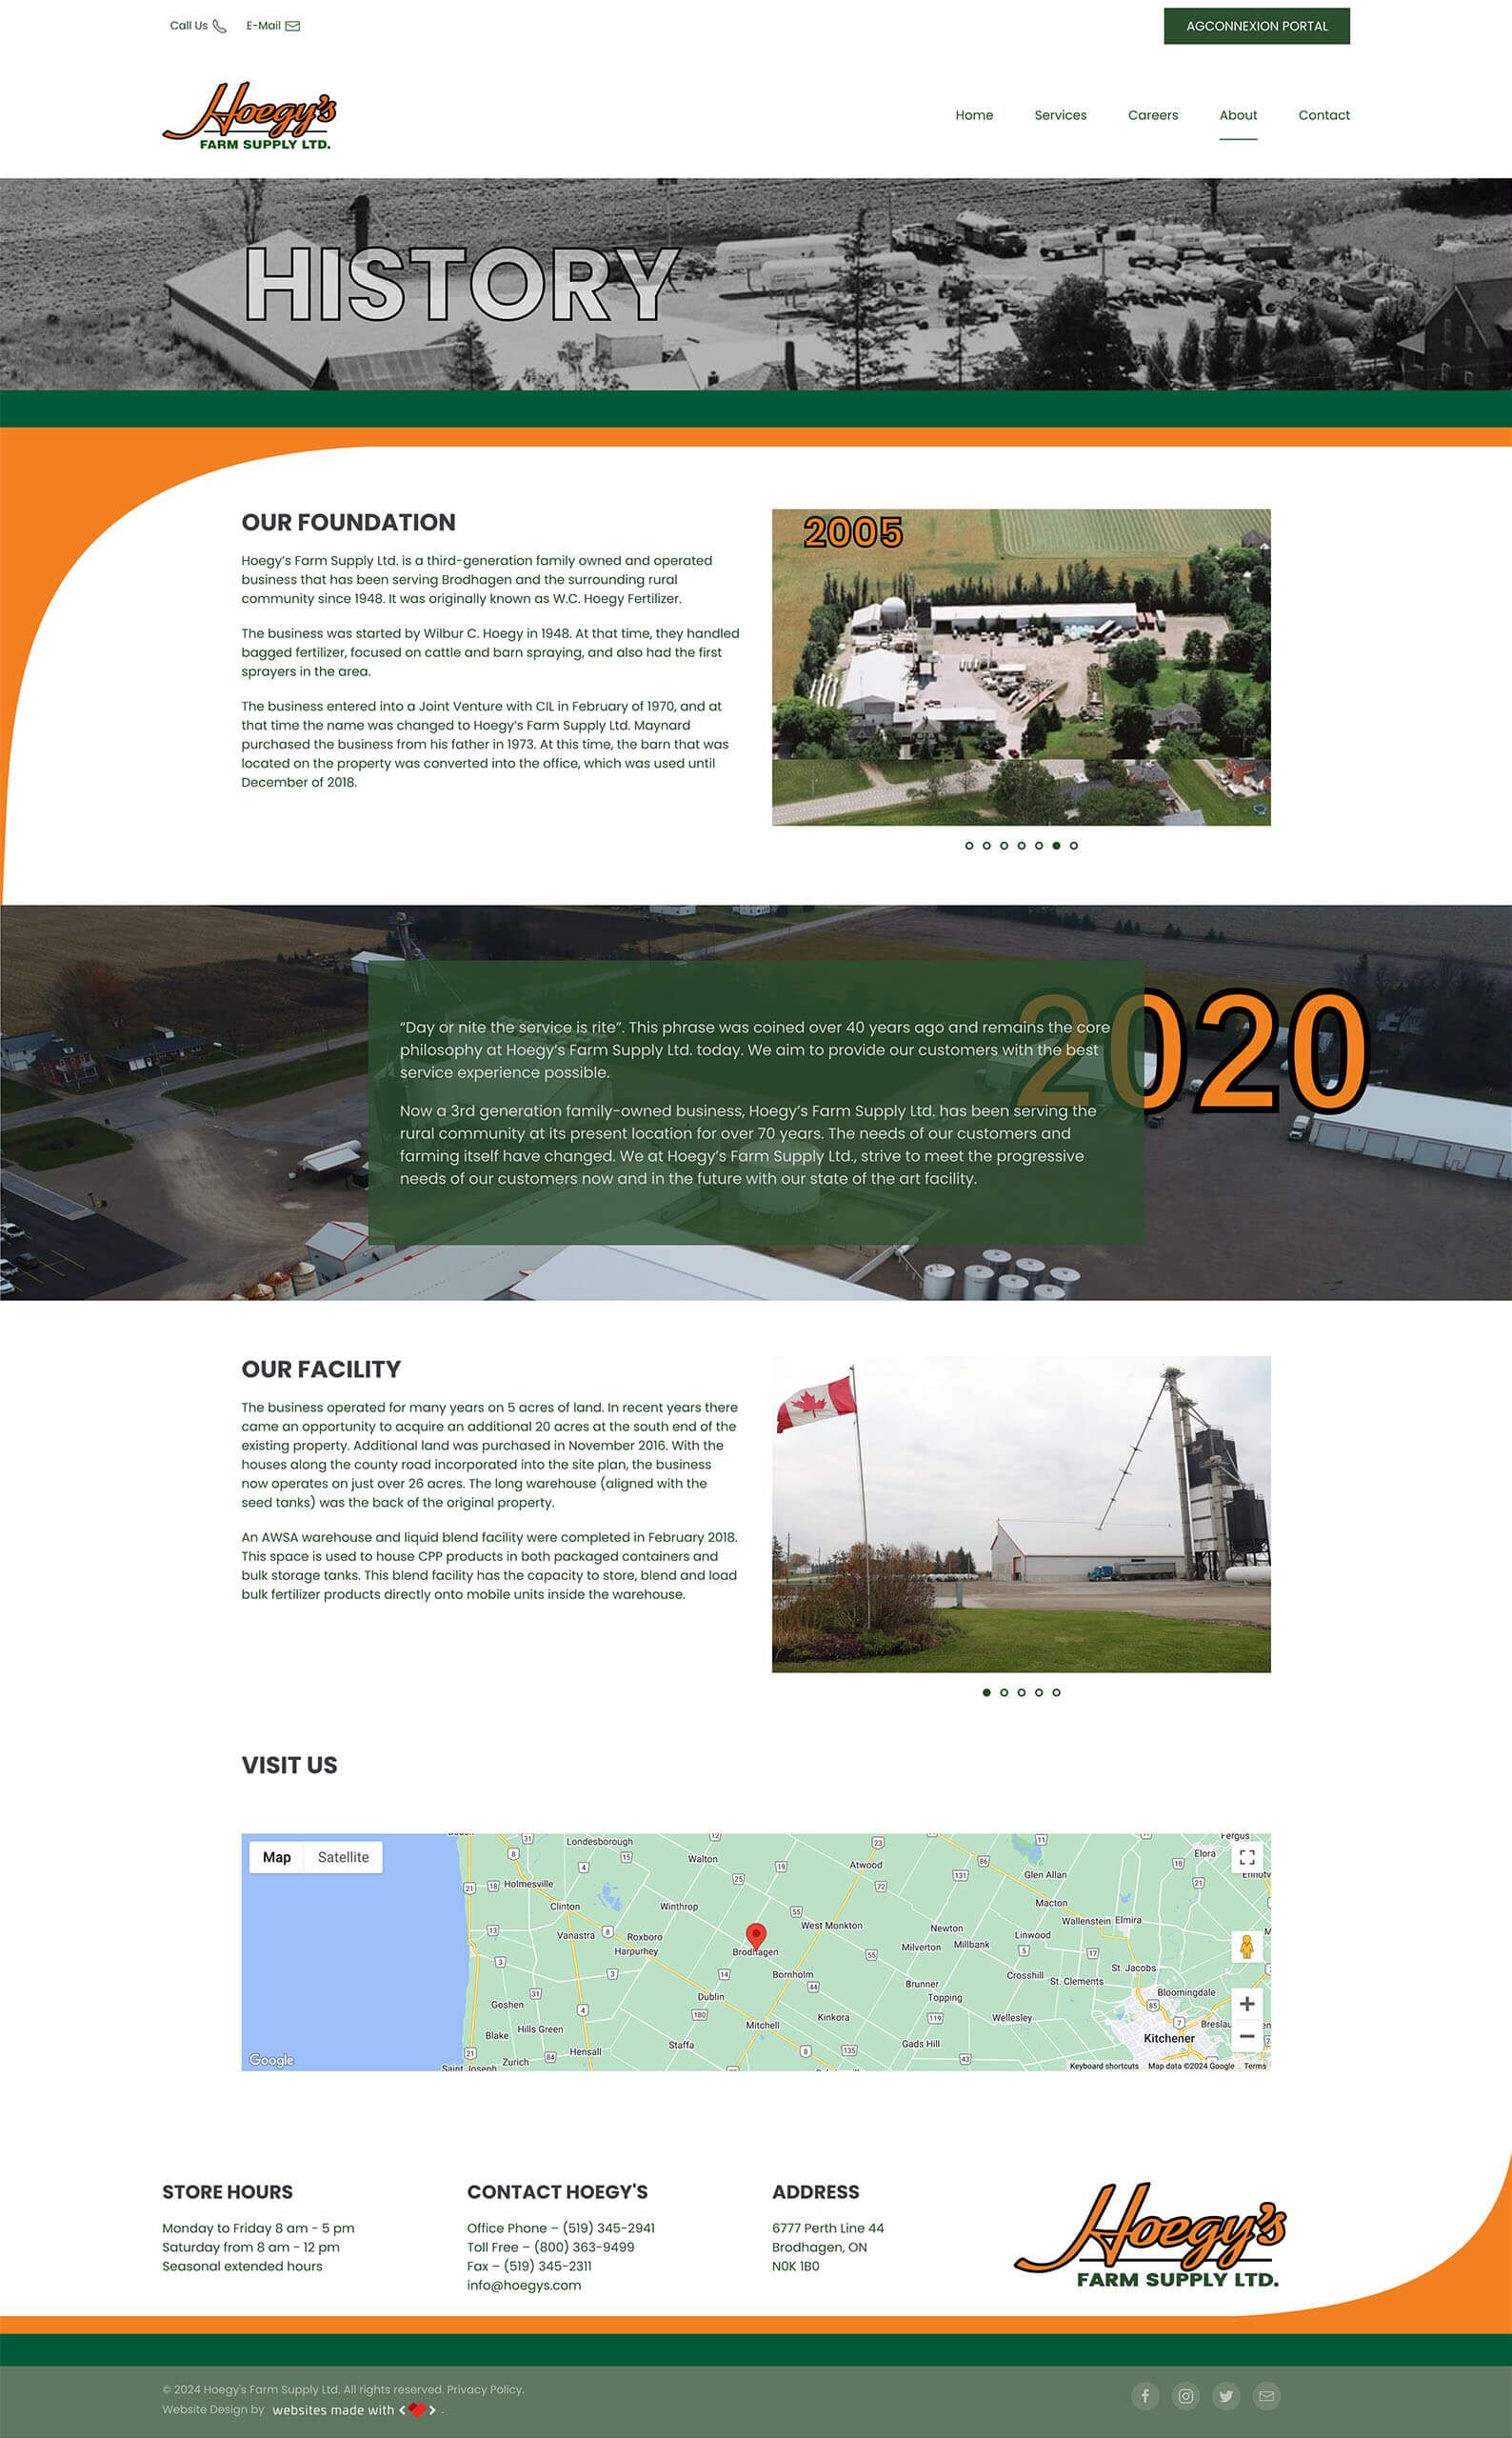 Hoegys Farm Supply Ltd History Page Full View Design